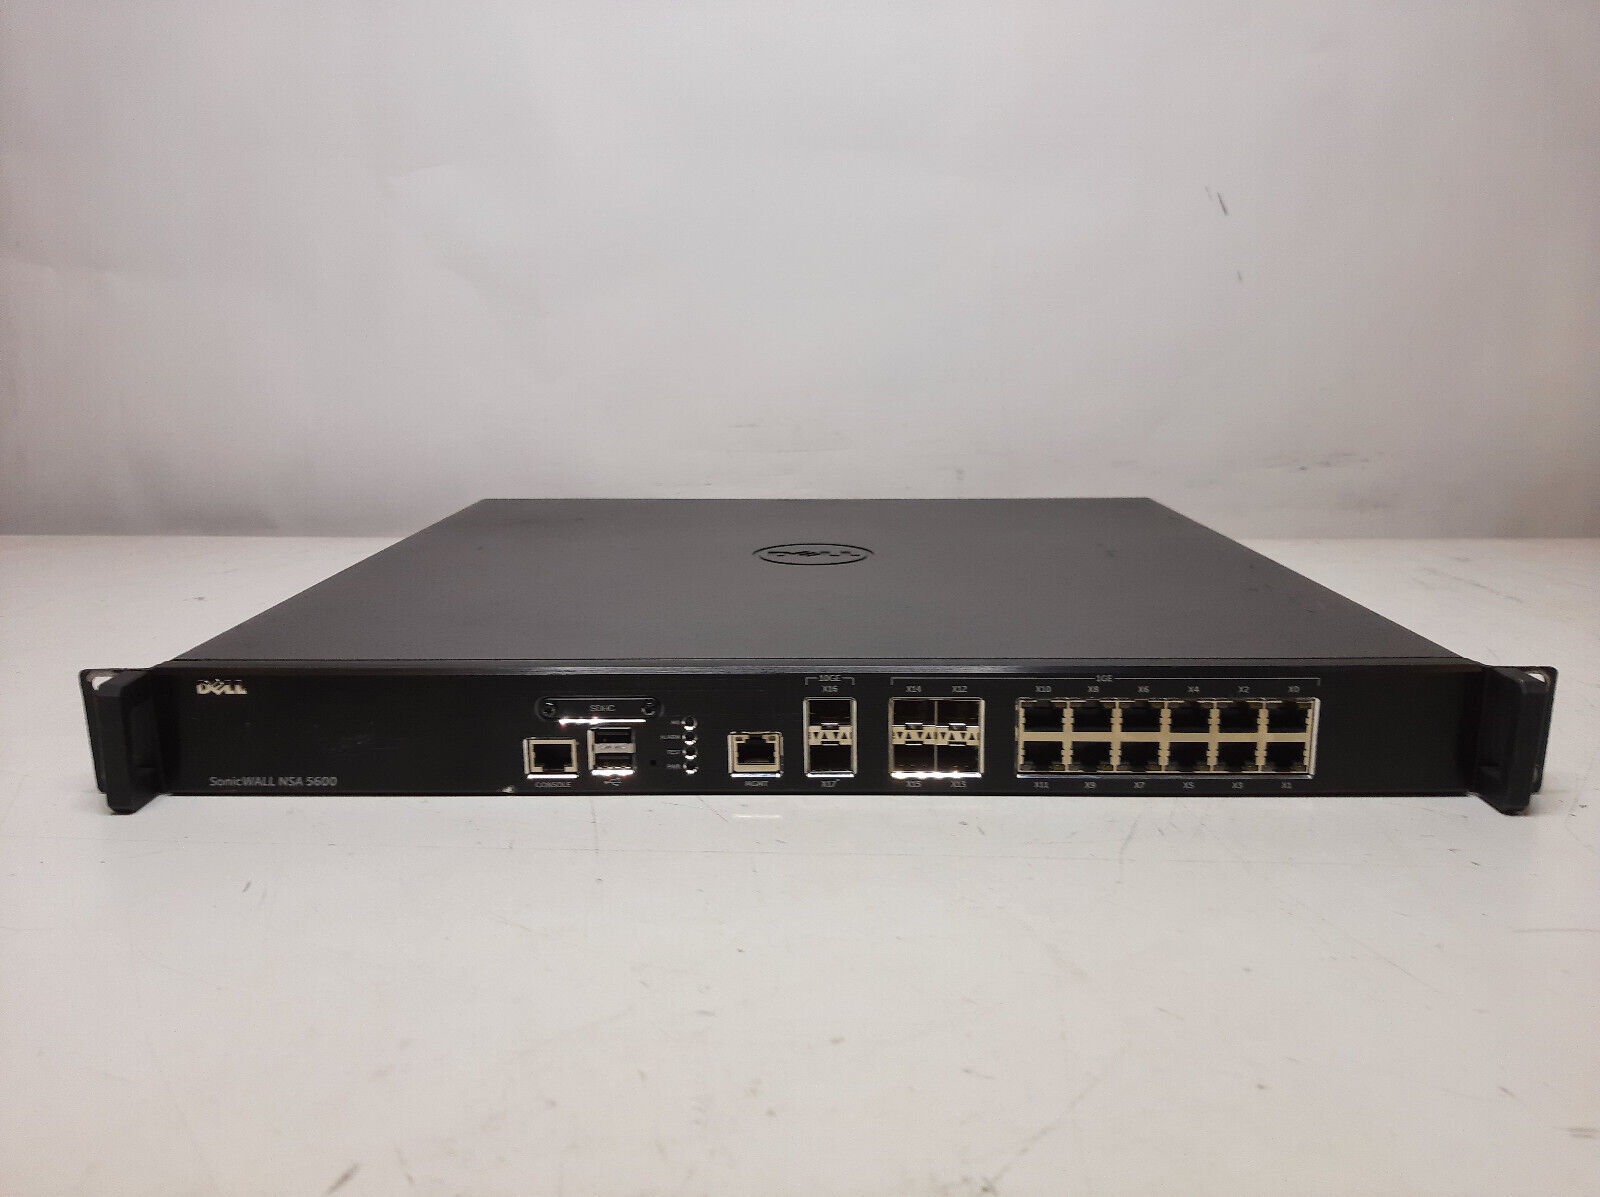 Sonicwall NSA 5600 Network Security Appliance SonicOS Enhanced 6.5.4.7 CLAIMED